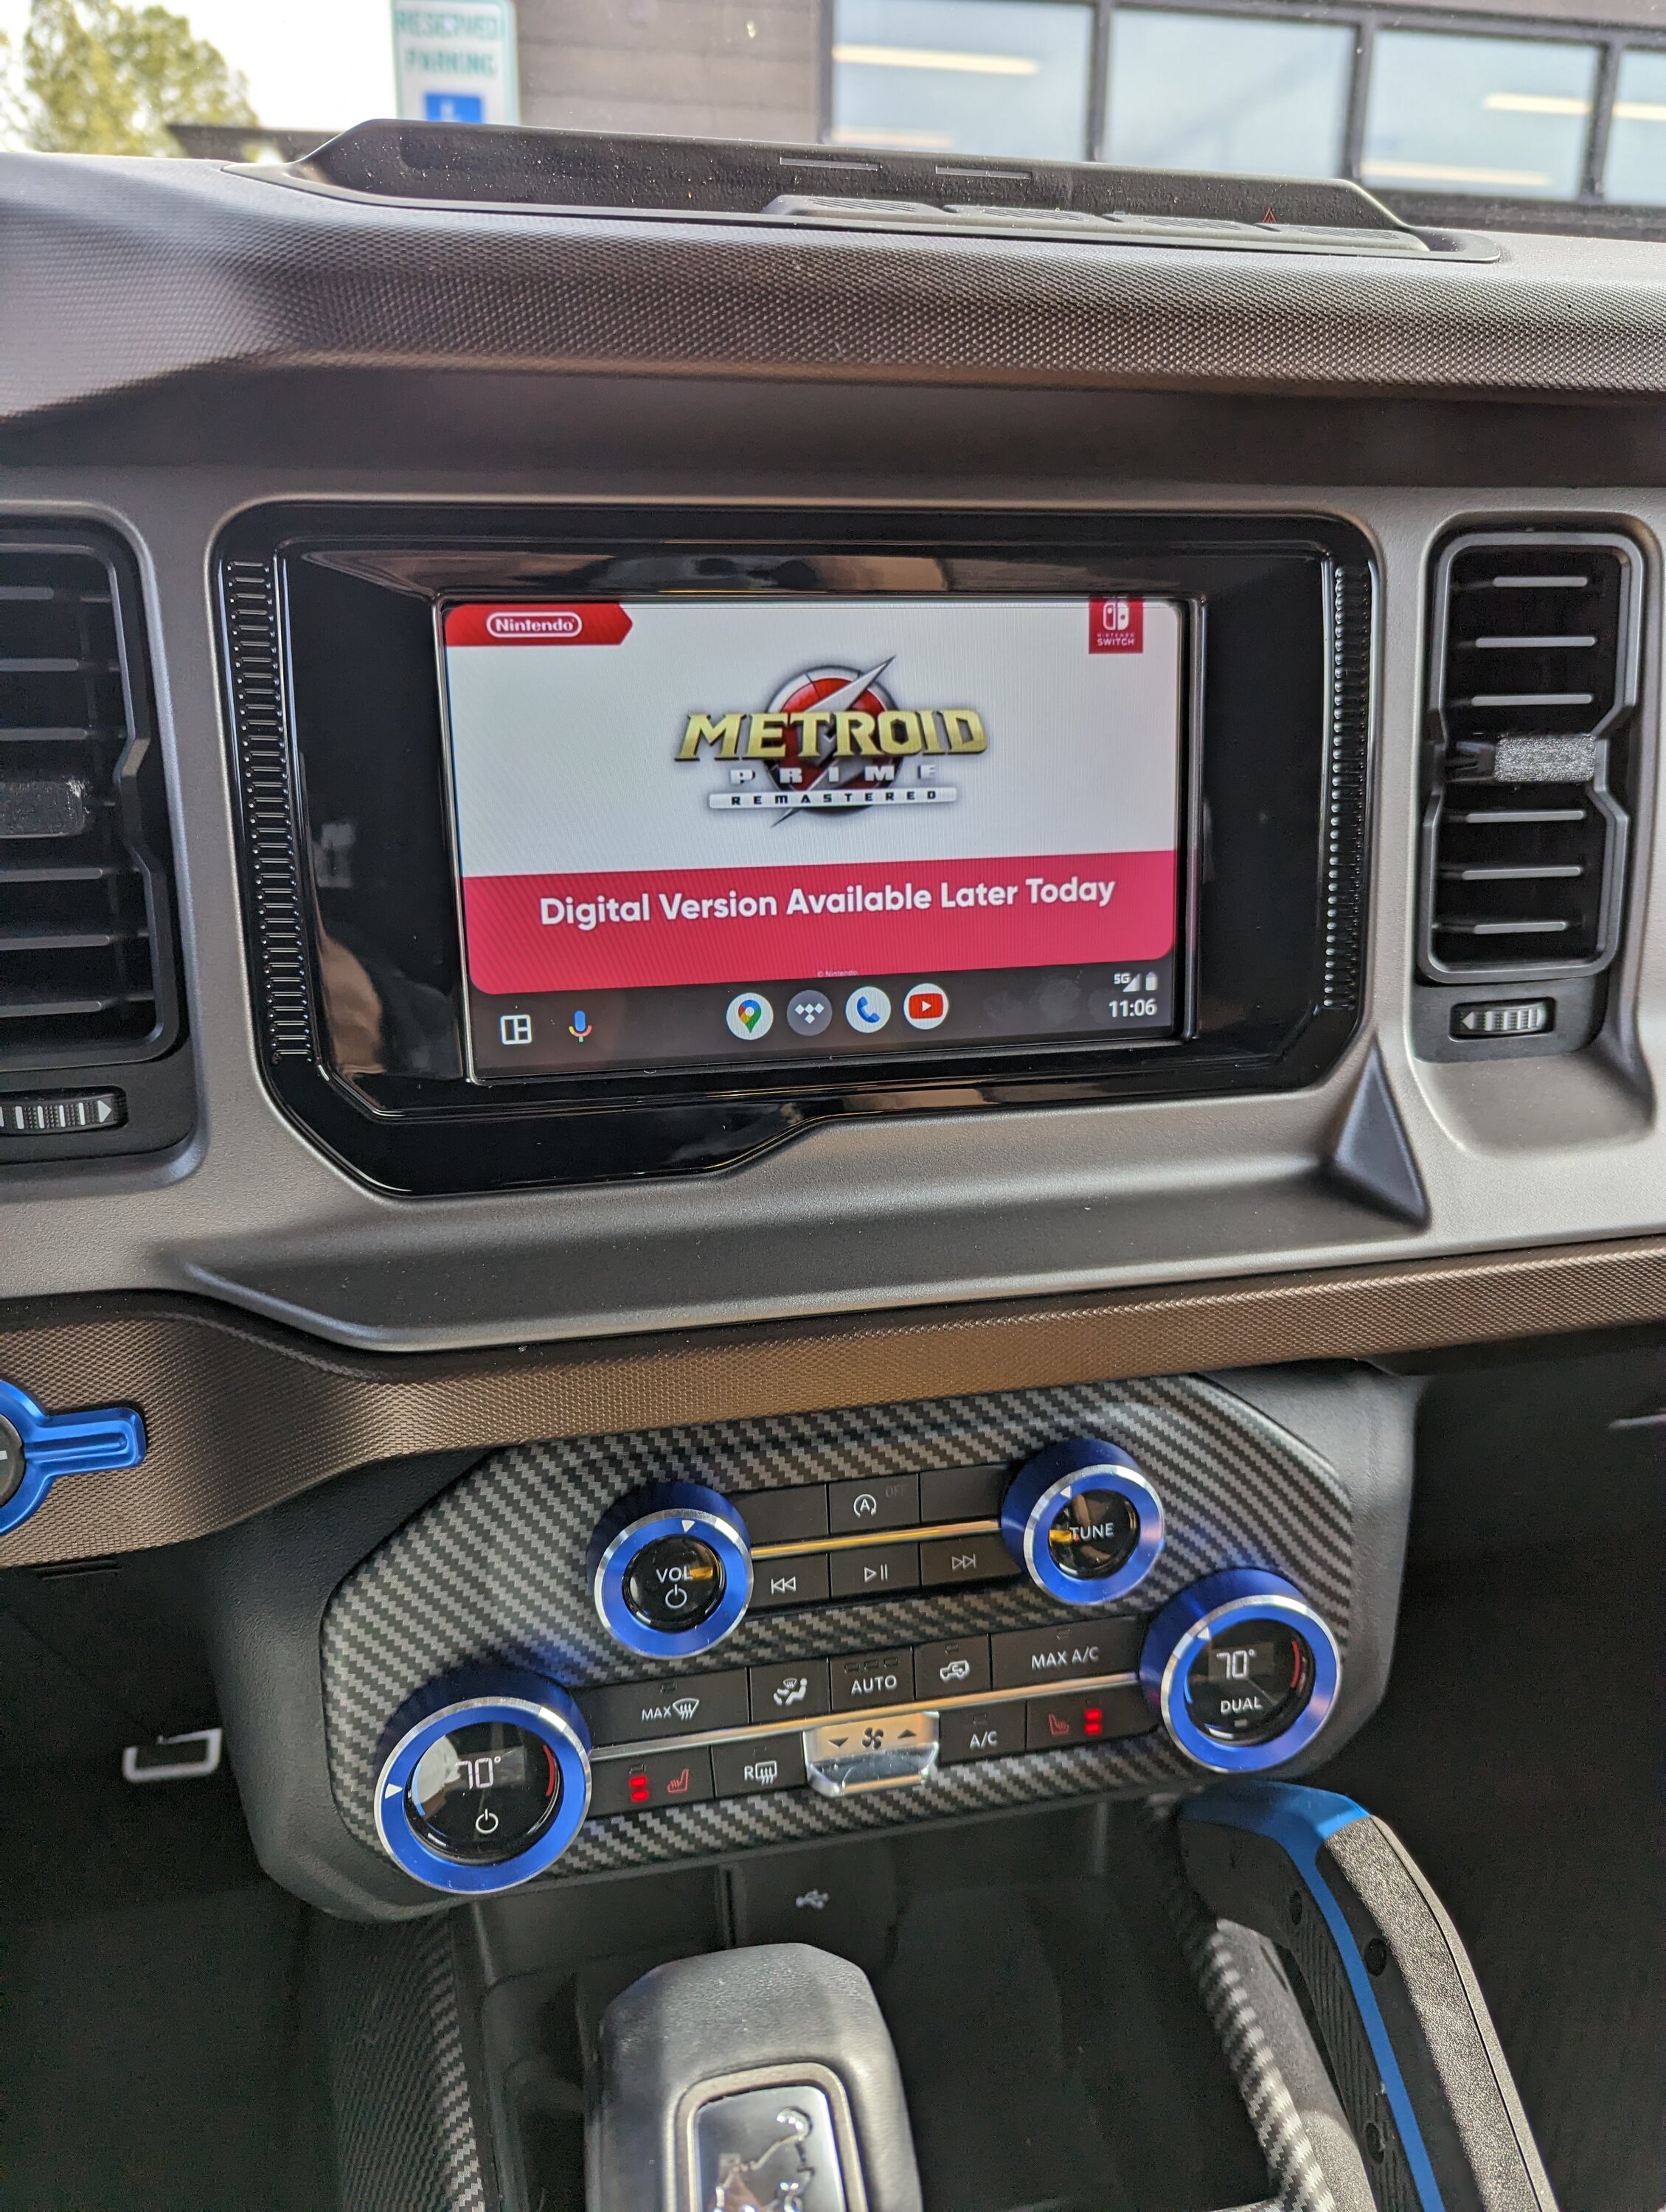 Ford Bronco Android Auto Coolwalk w/ Full Split Screen (Public Stable Release) Now Working in Bronco! PXL_20230211_160623406